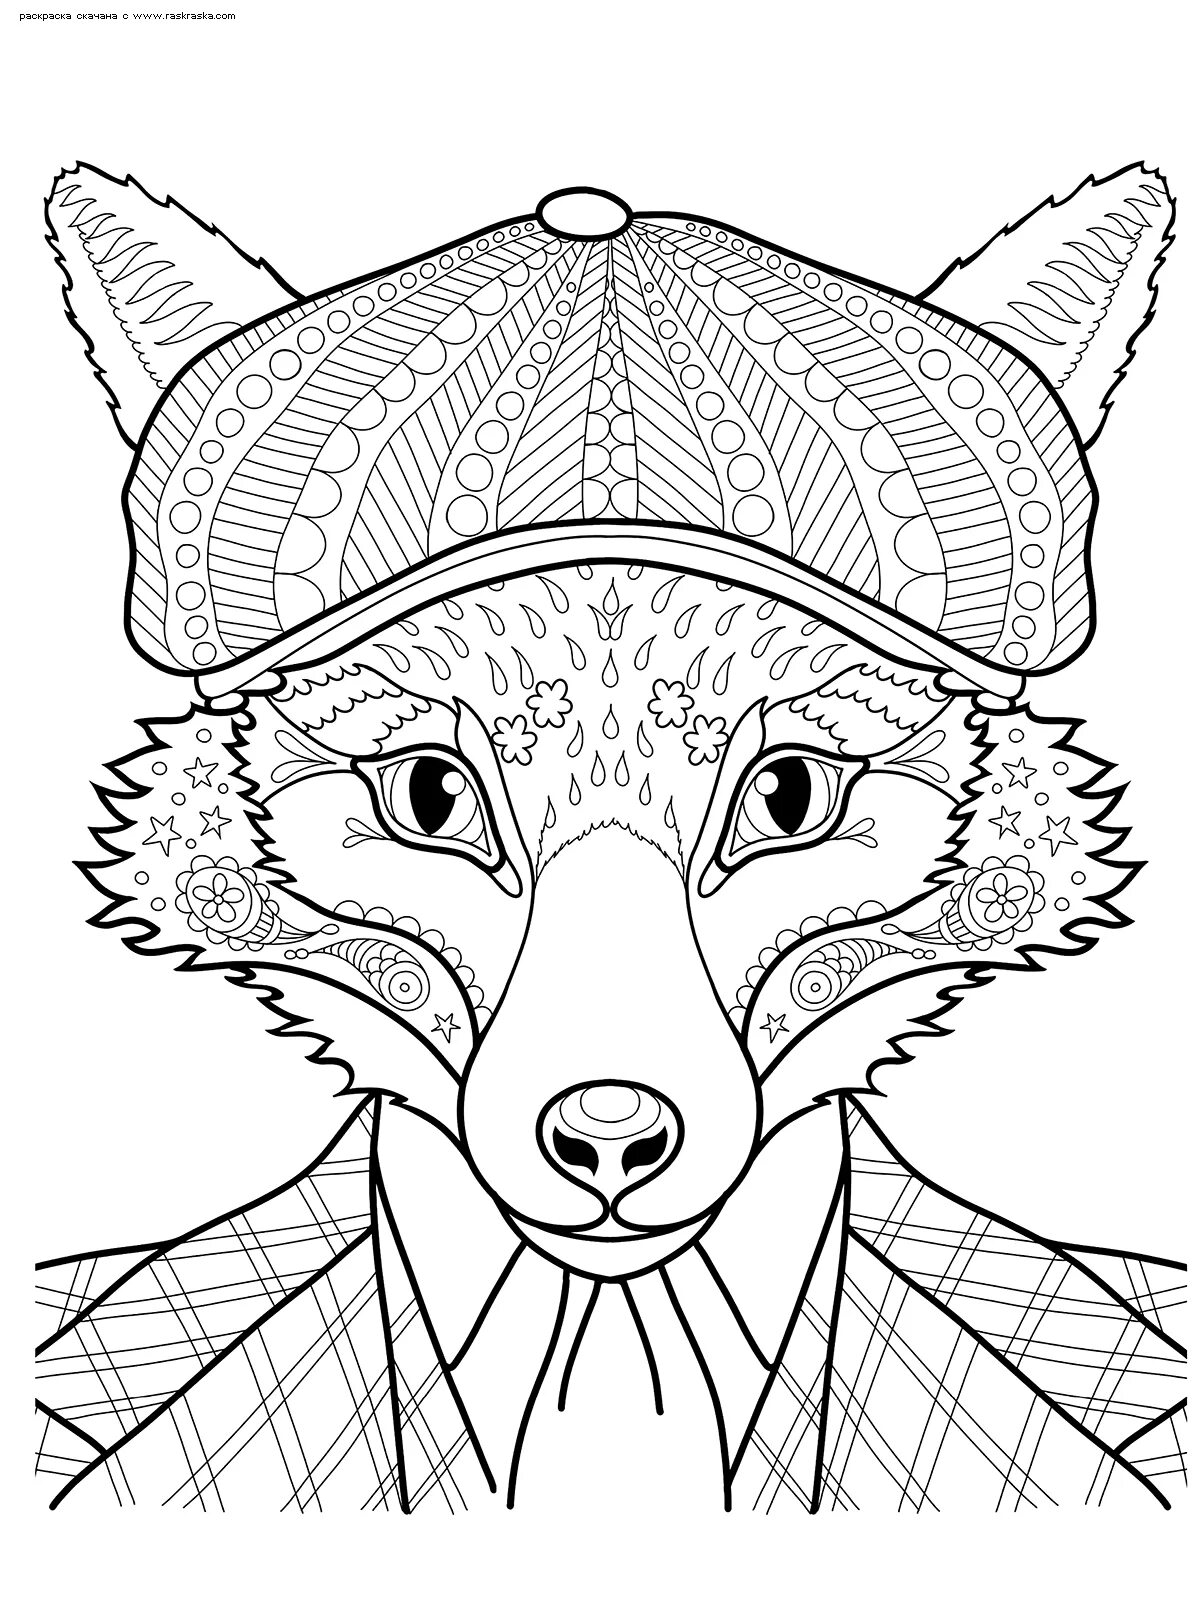 Exalted coloring page fox complex